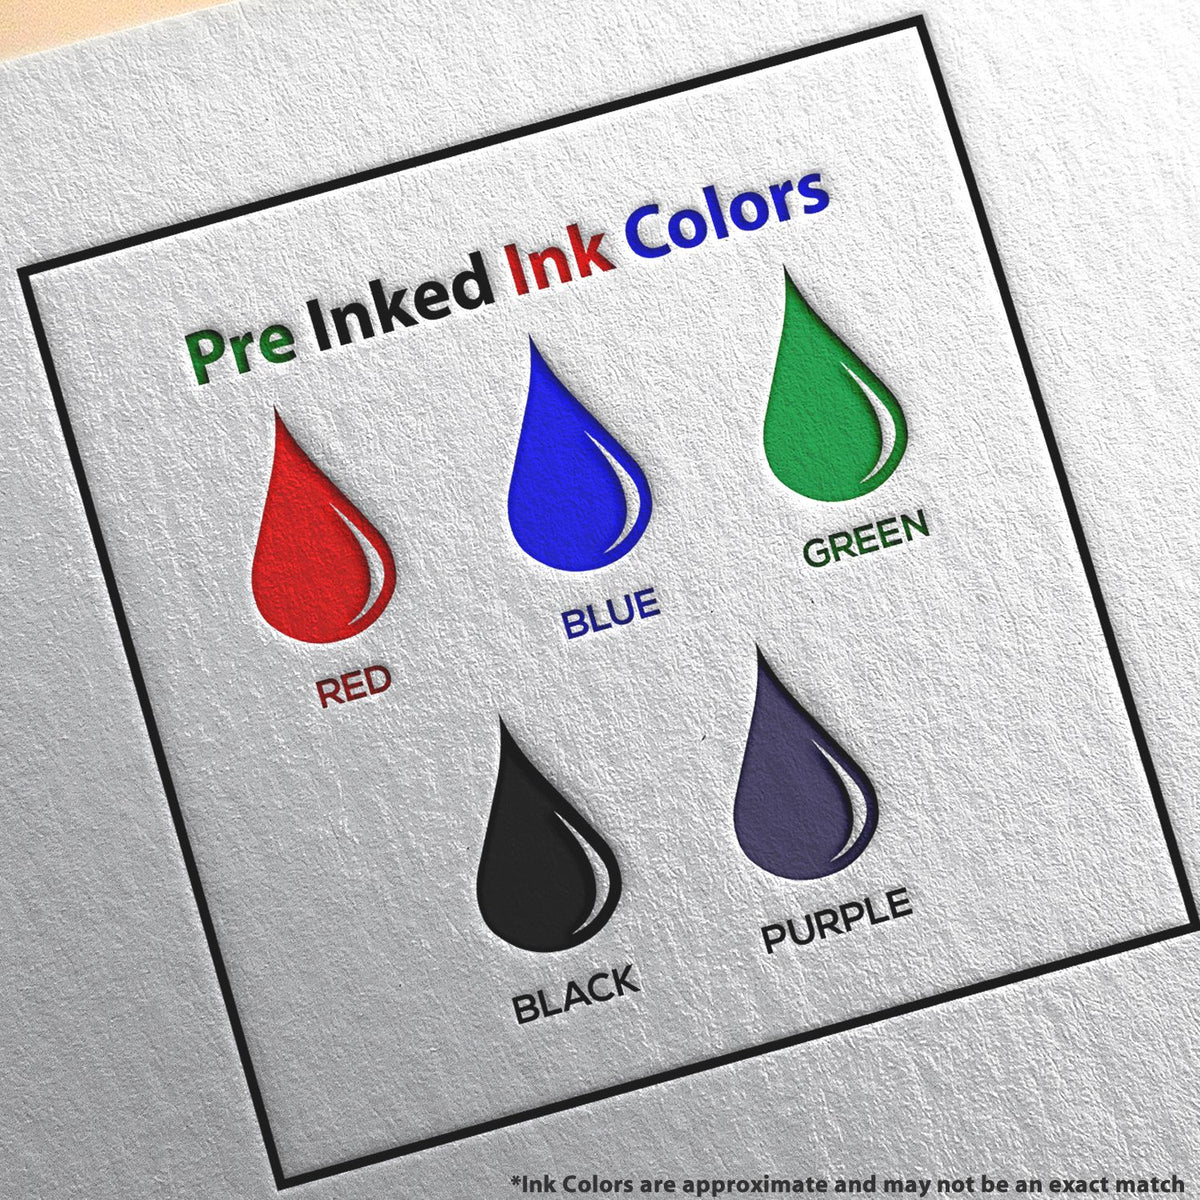 A picture showing the different ink colors or hues available for the Slim Pre-Inked Maine Architect Seal Stamp product.